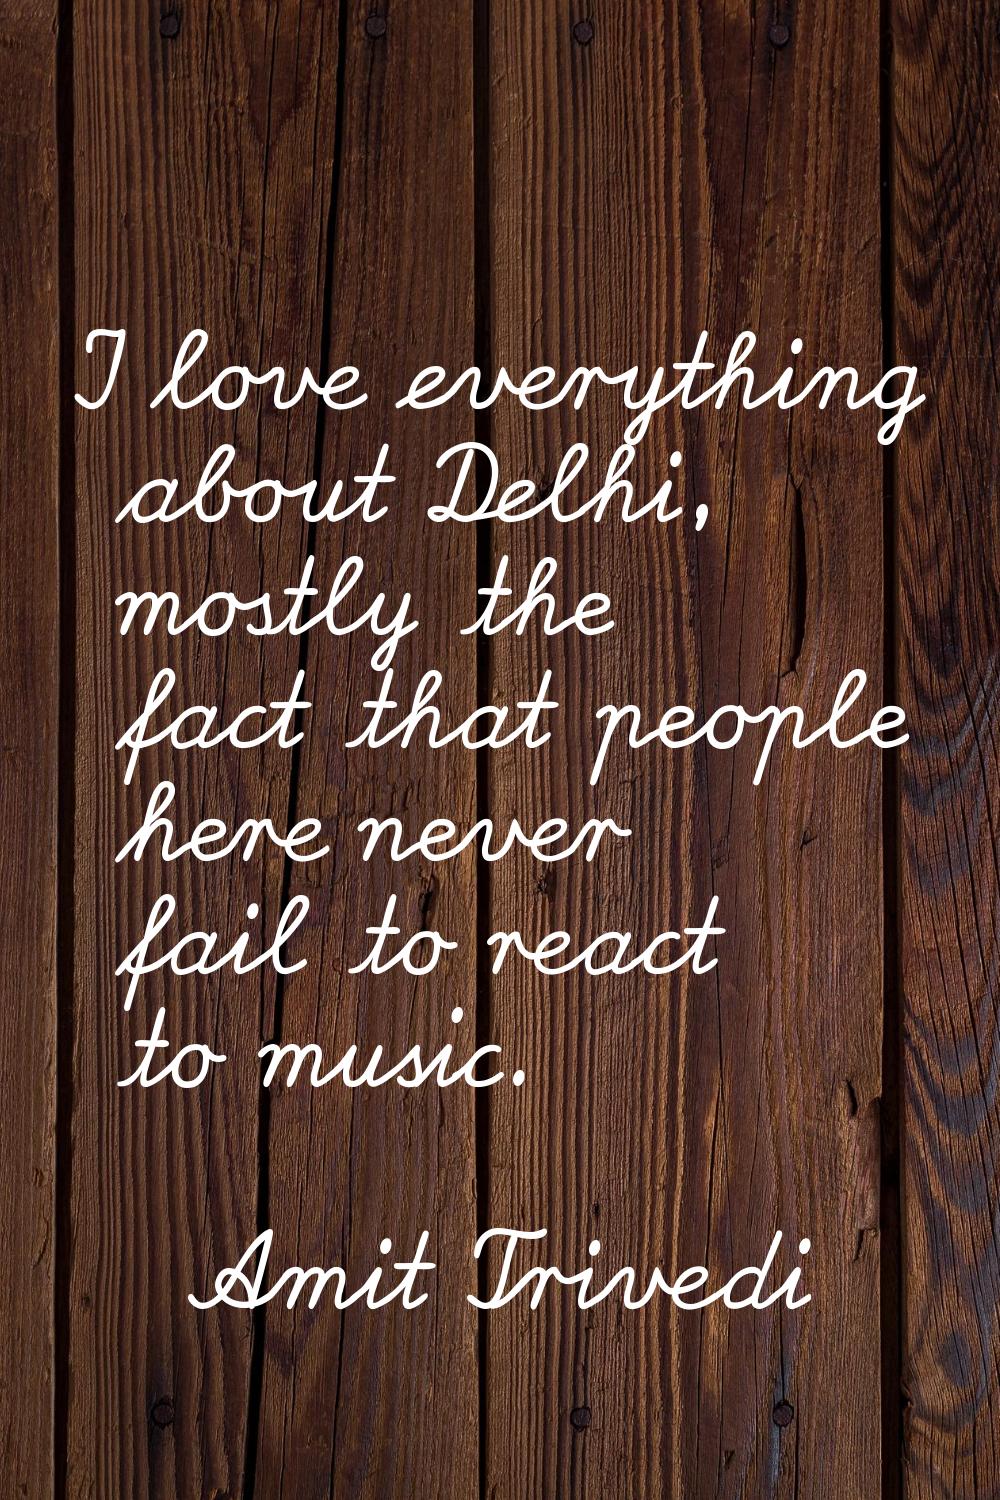 I love everything about Delhi, mostly the fact that people here never fail to react to music.